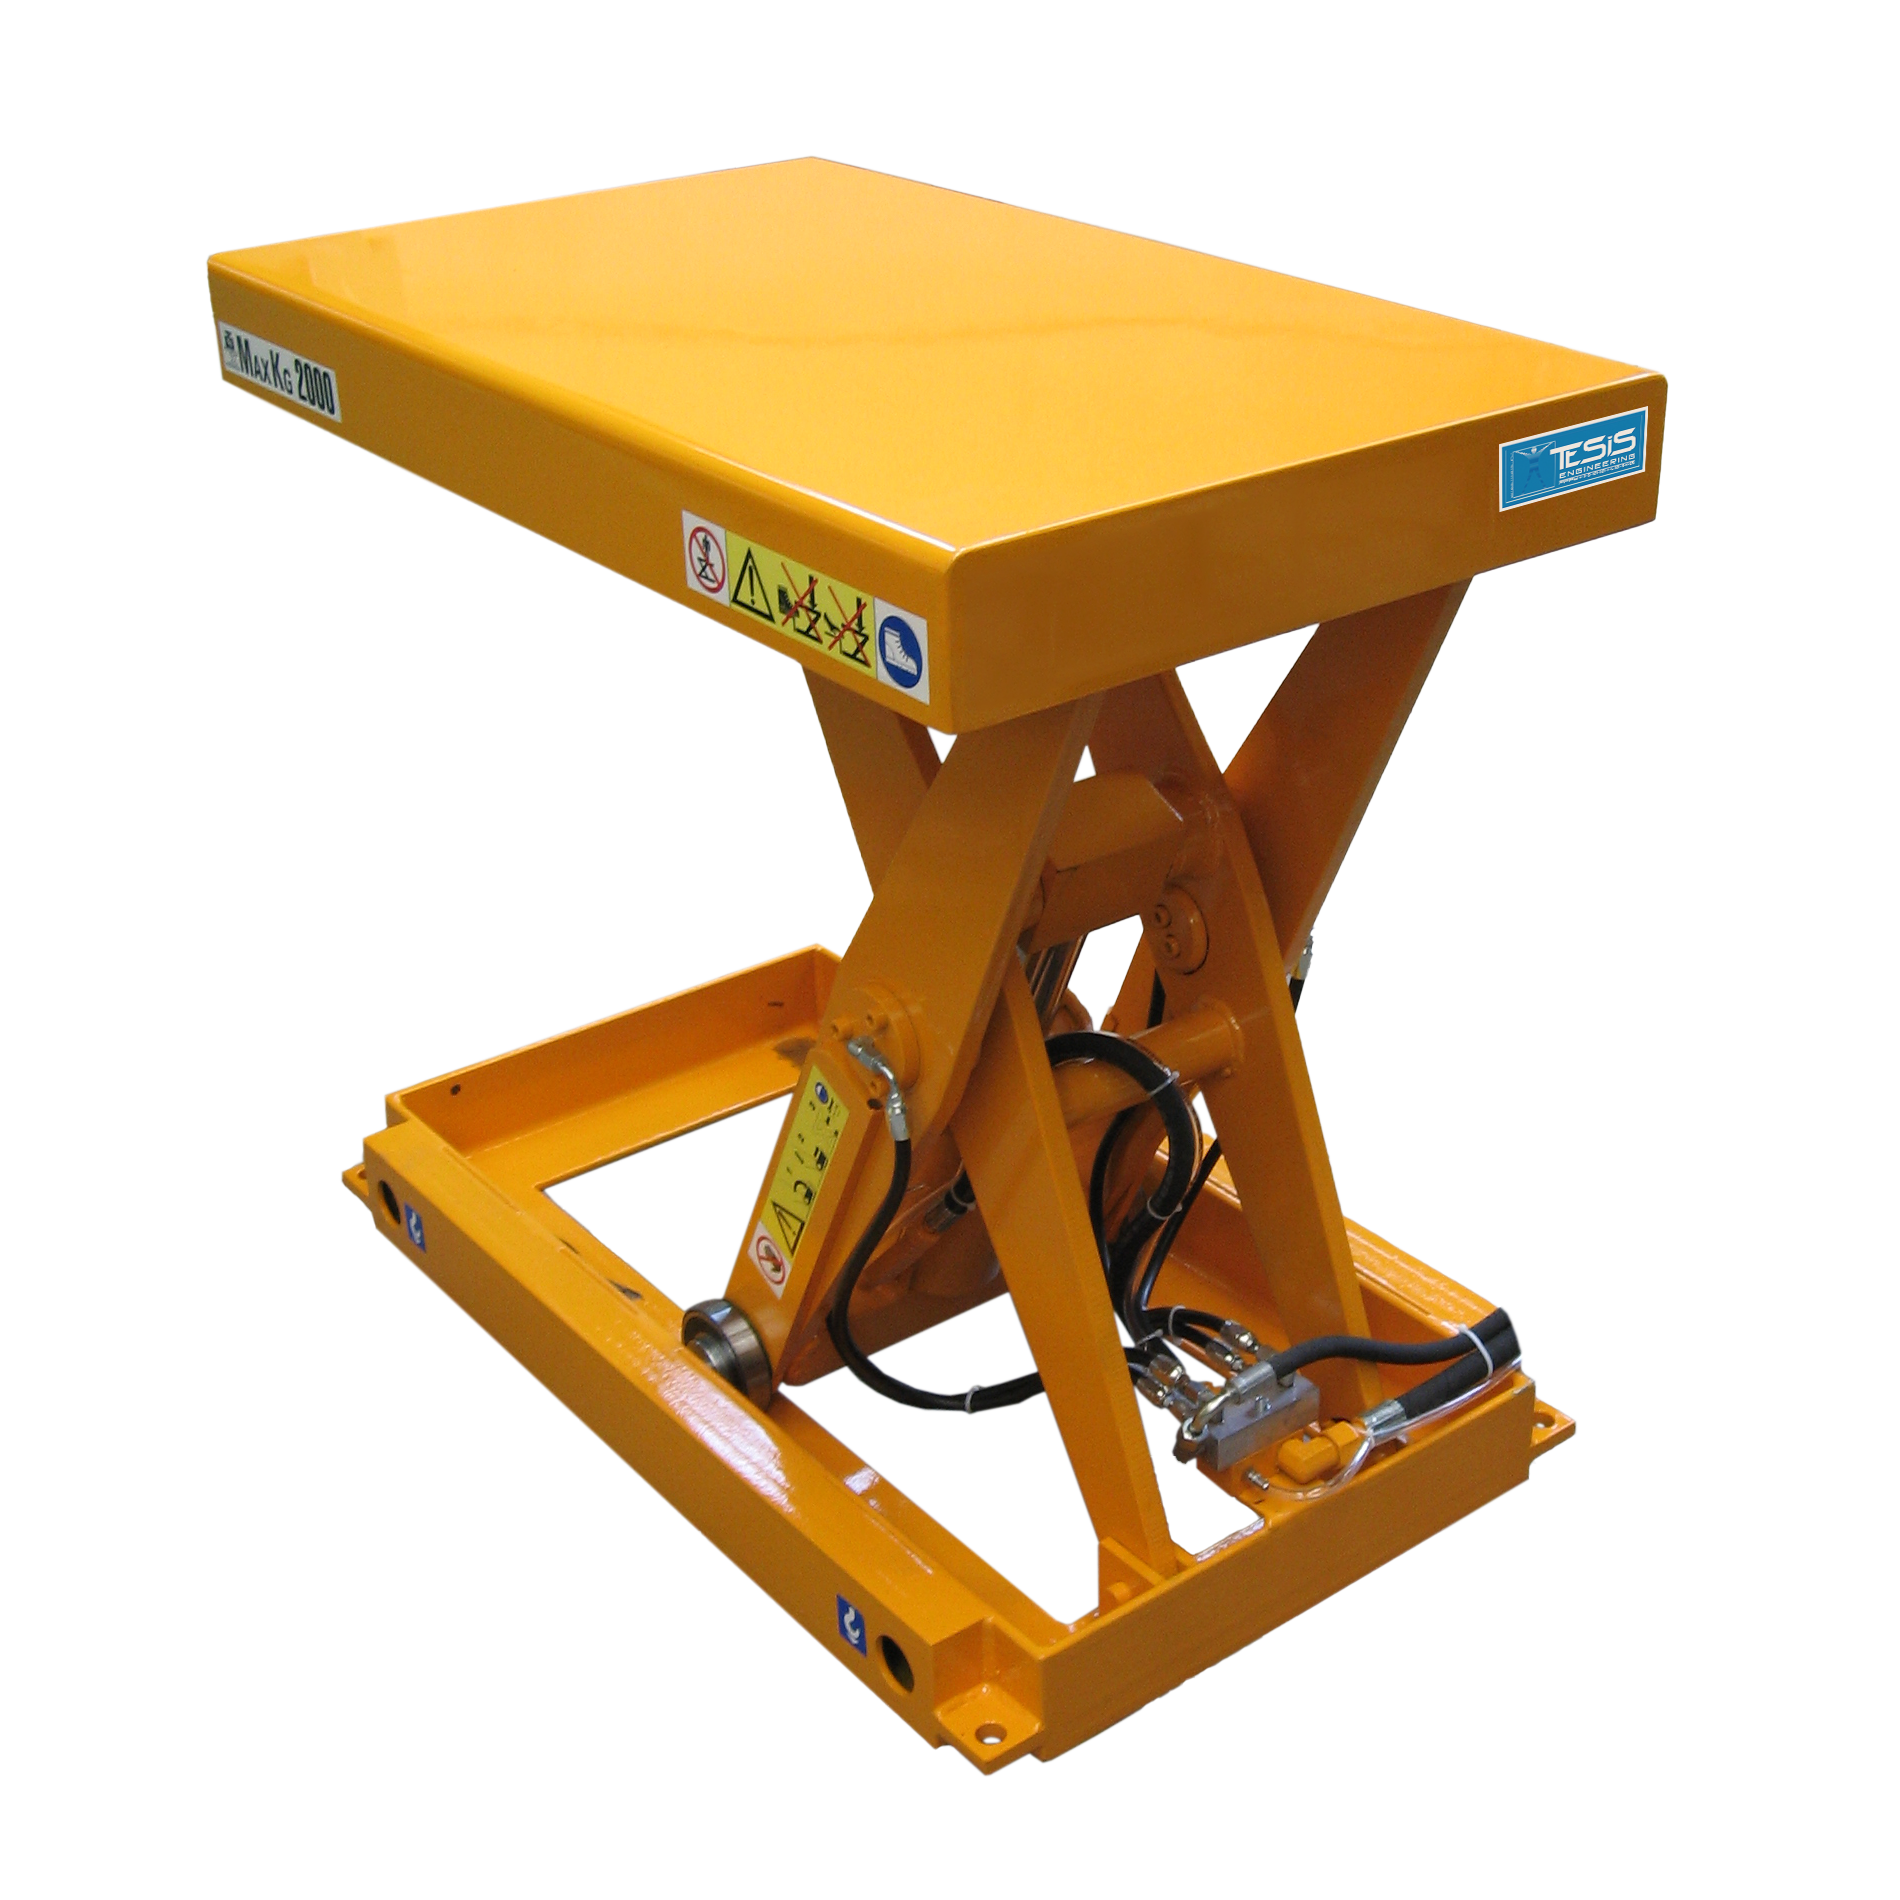 Industrial hydraulic lifting table with automatic lubrication system - scissor lifting platforms for intensive use - heavy duty lift tables - scissor lift tables 